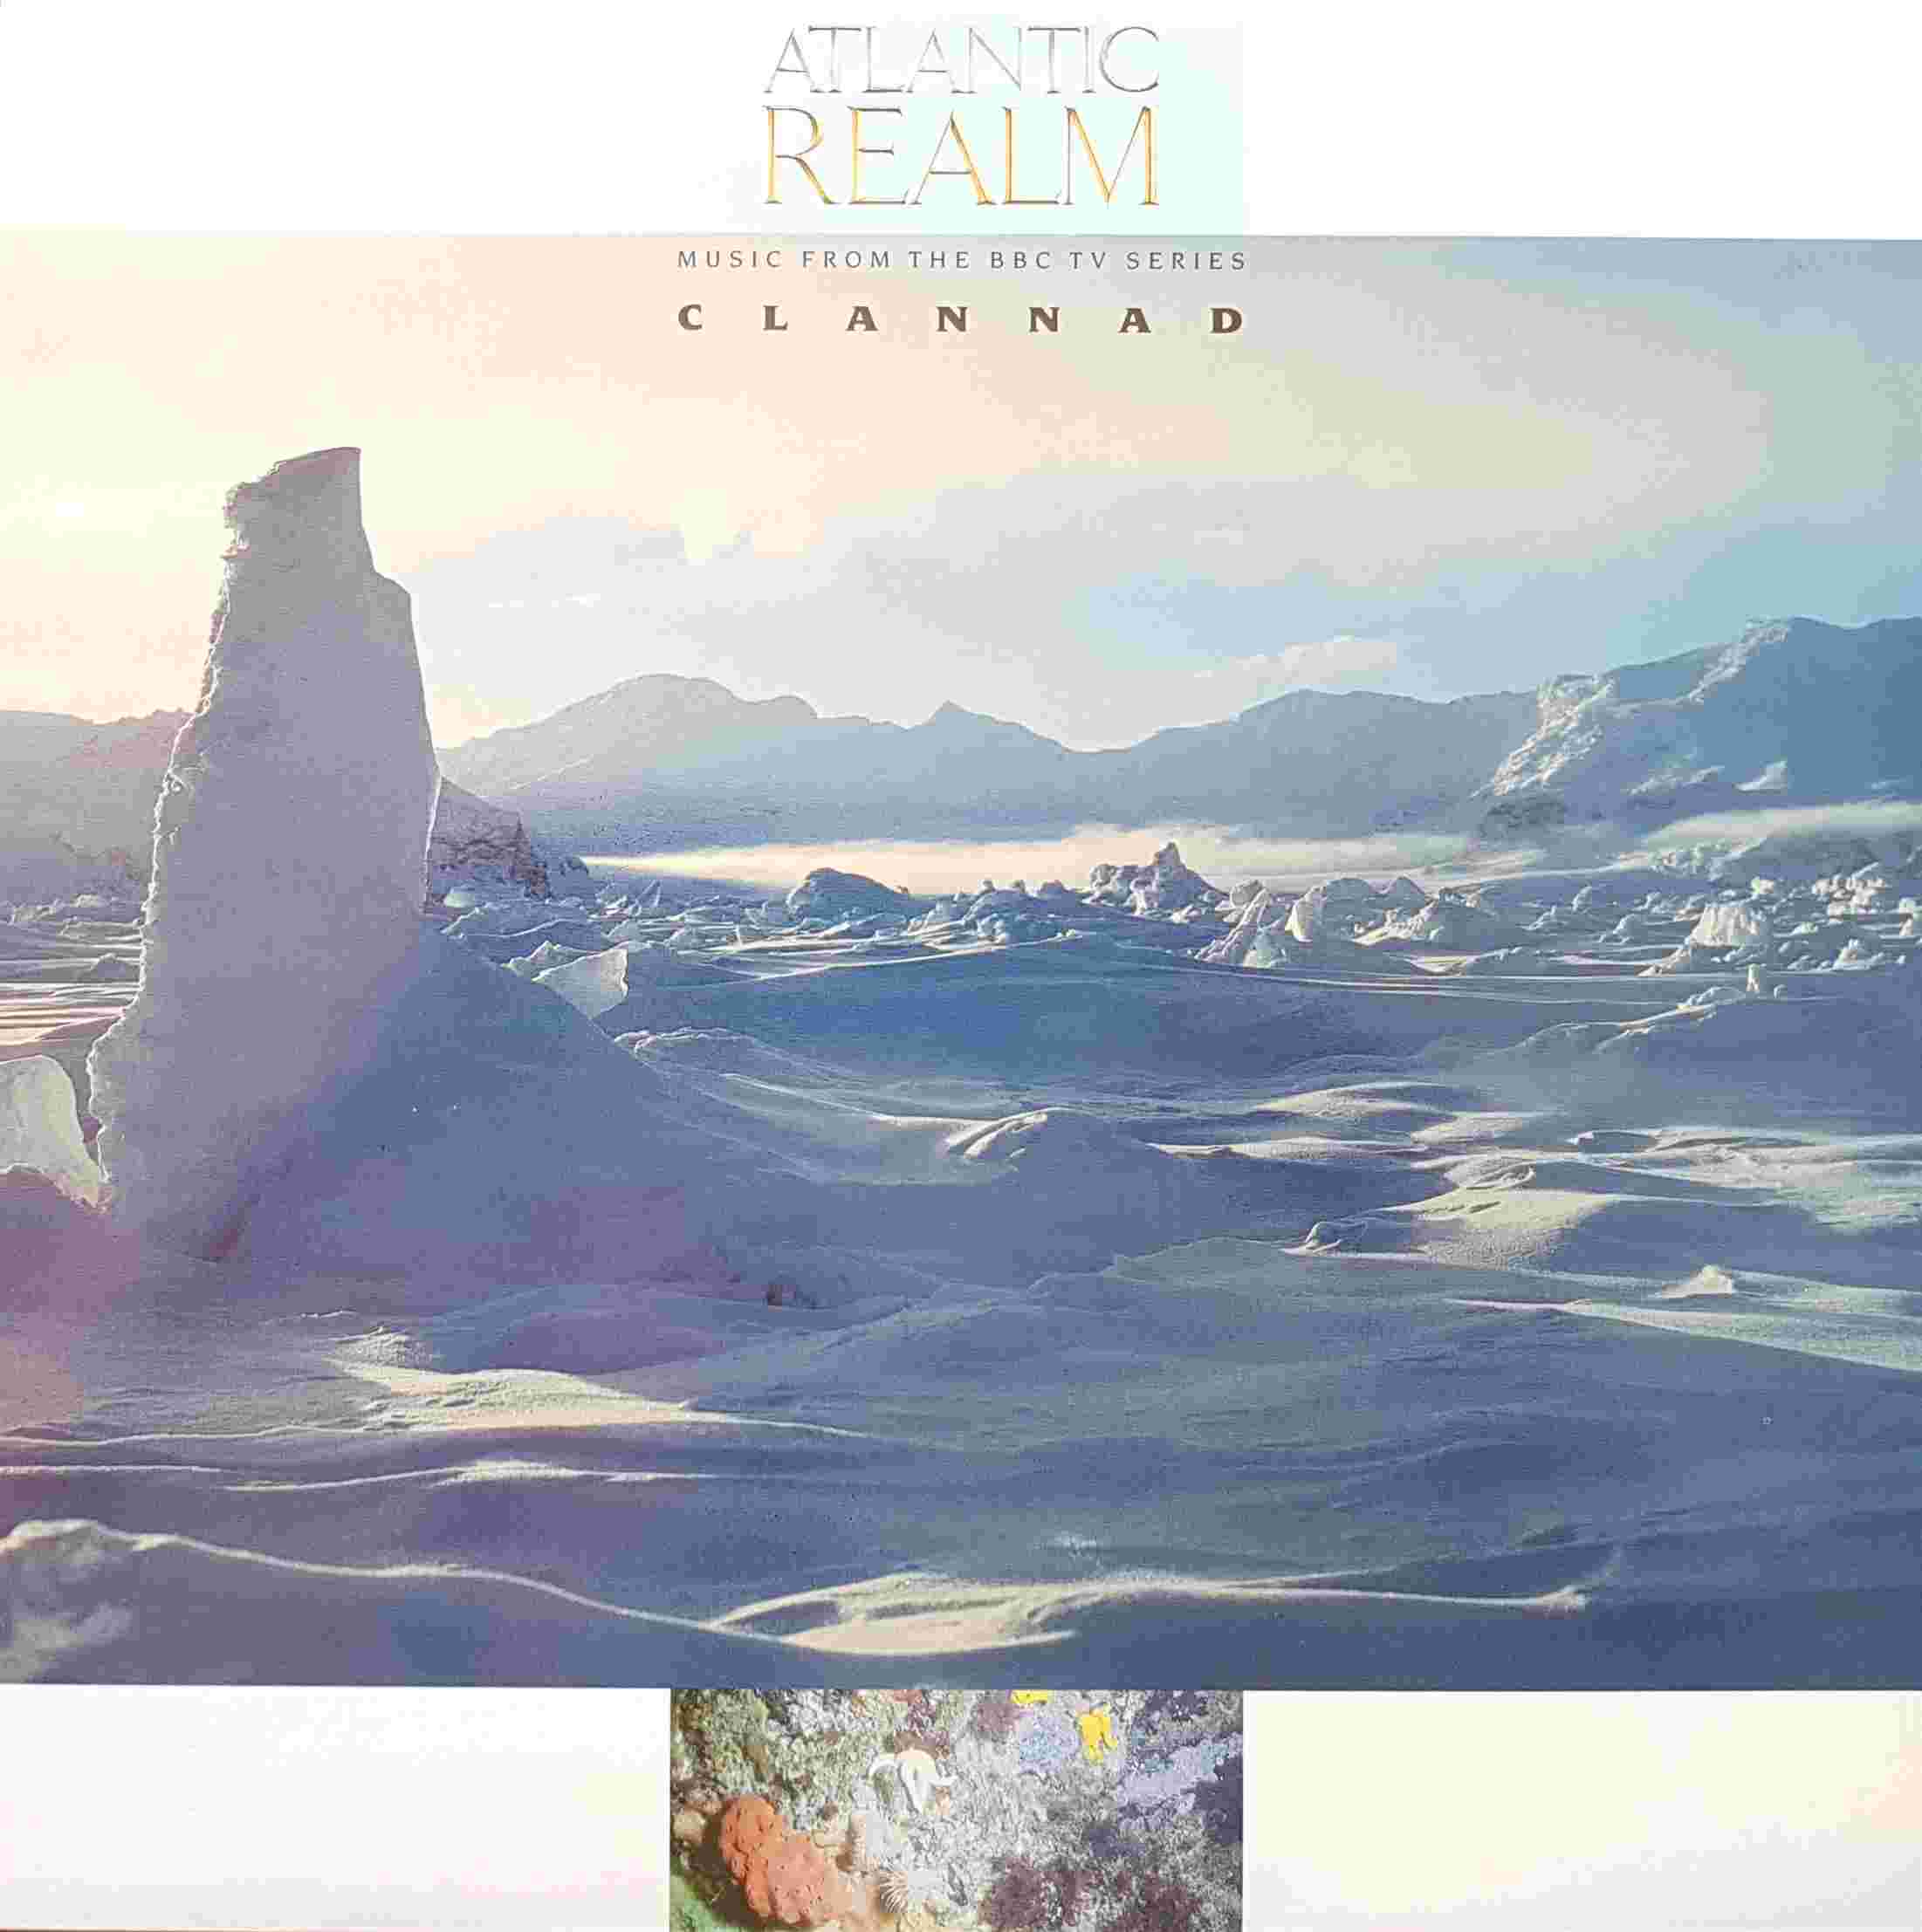 Picture of REB 727 Atlantic realm by artist Clannad from the BBC albums - Records and Tapes library